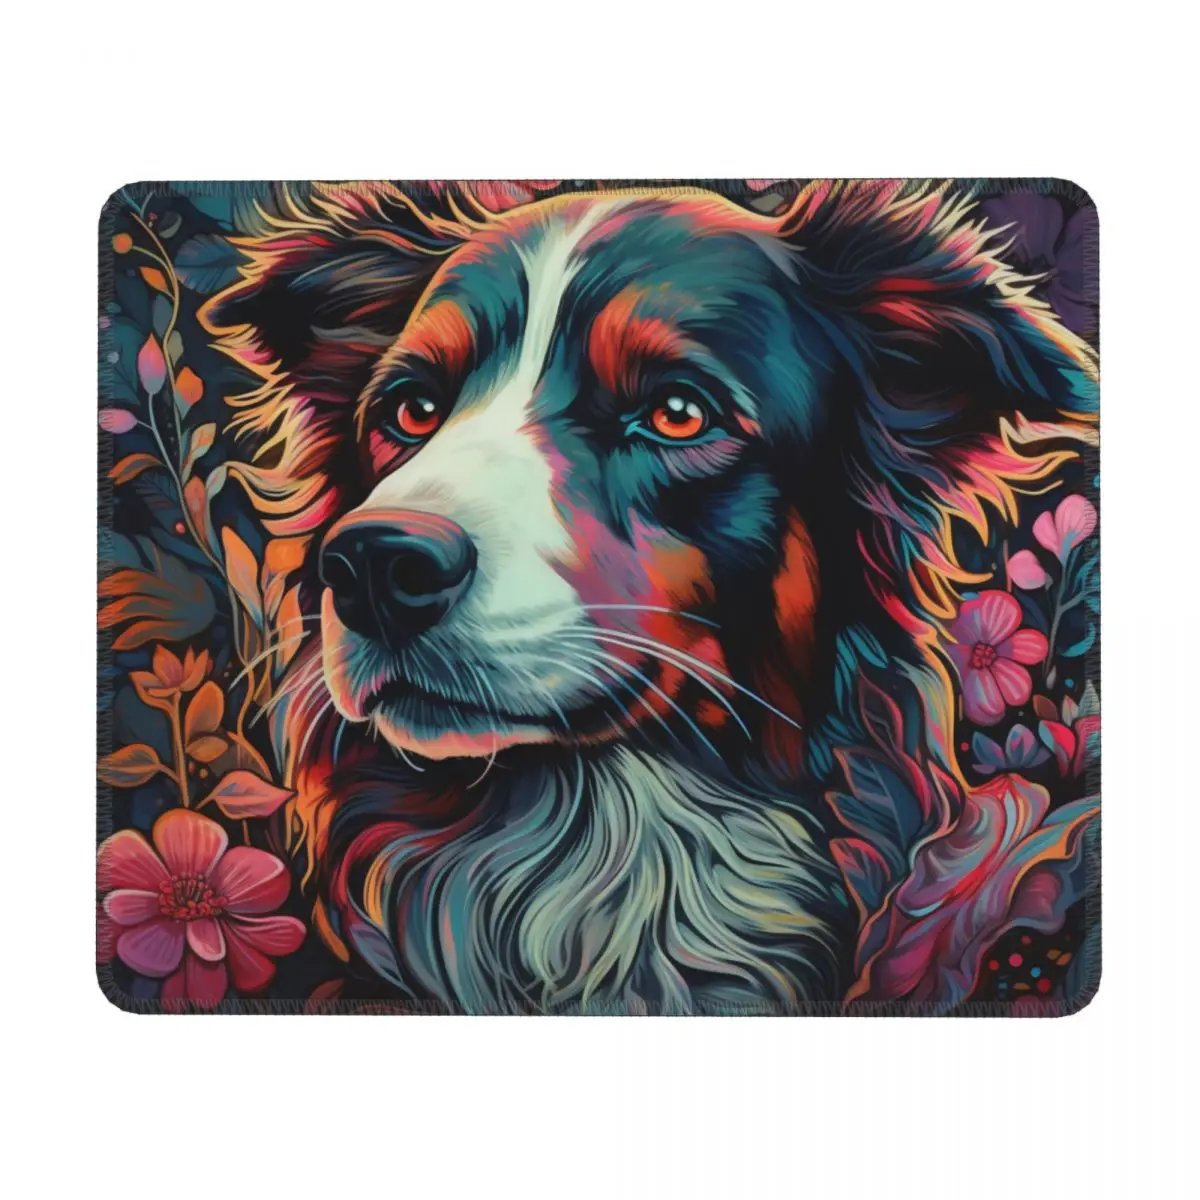 

Dog Horizontal Print Mouse Pad Colorful Painting Neon Rubber Desk Mousepad Anti Fatigue Vintage Quality Mouse Pads